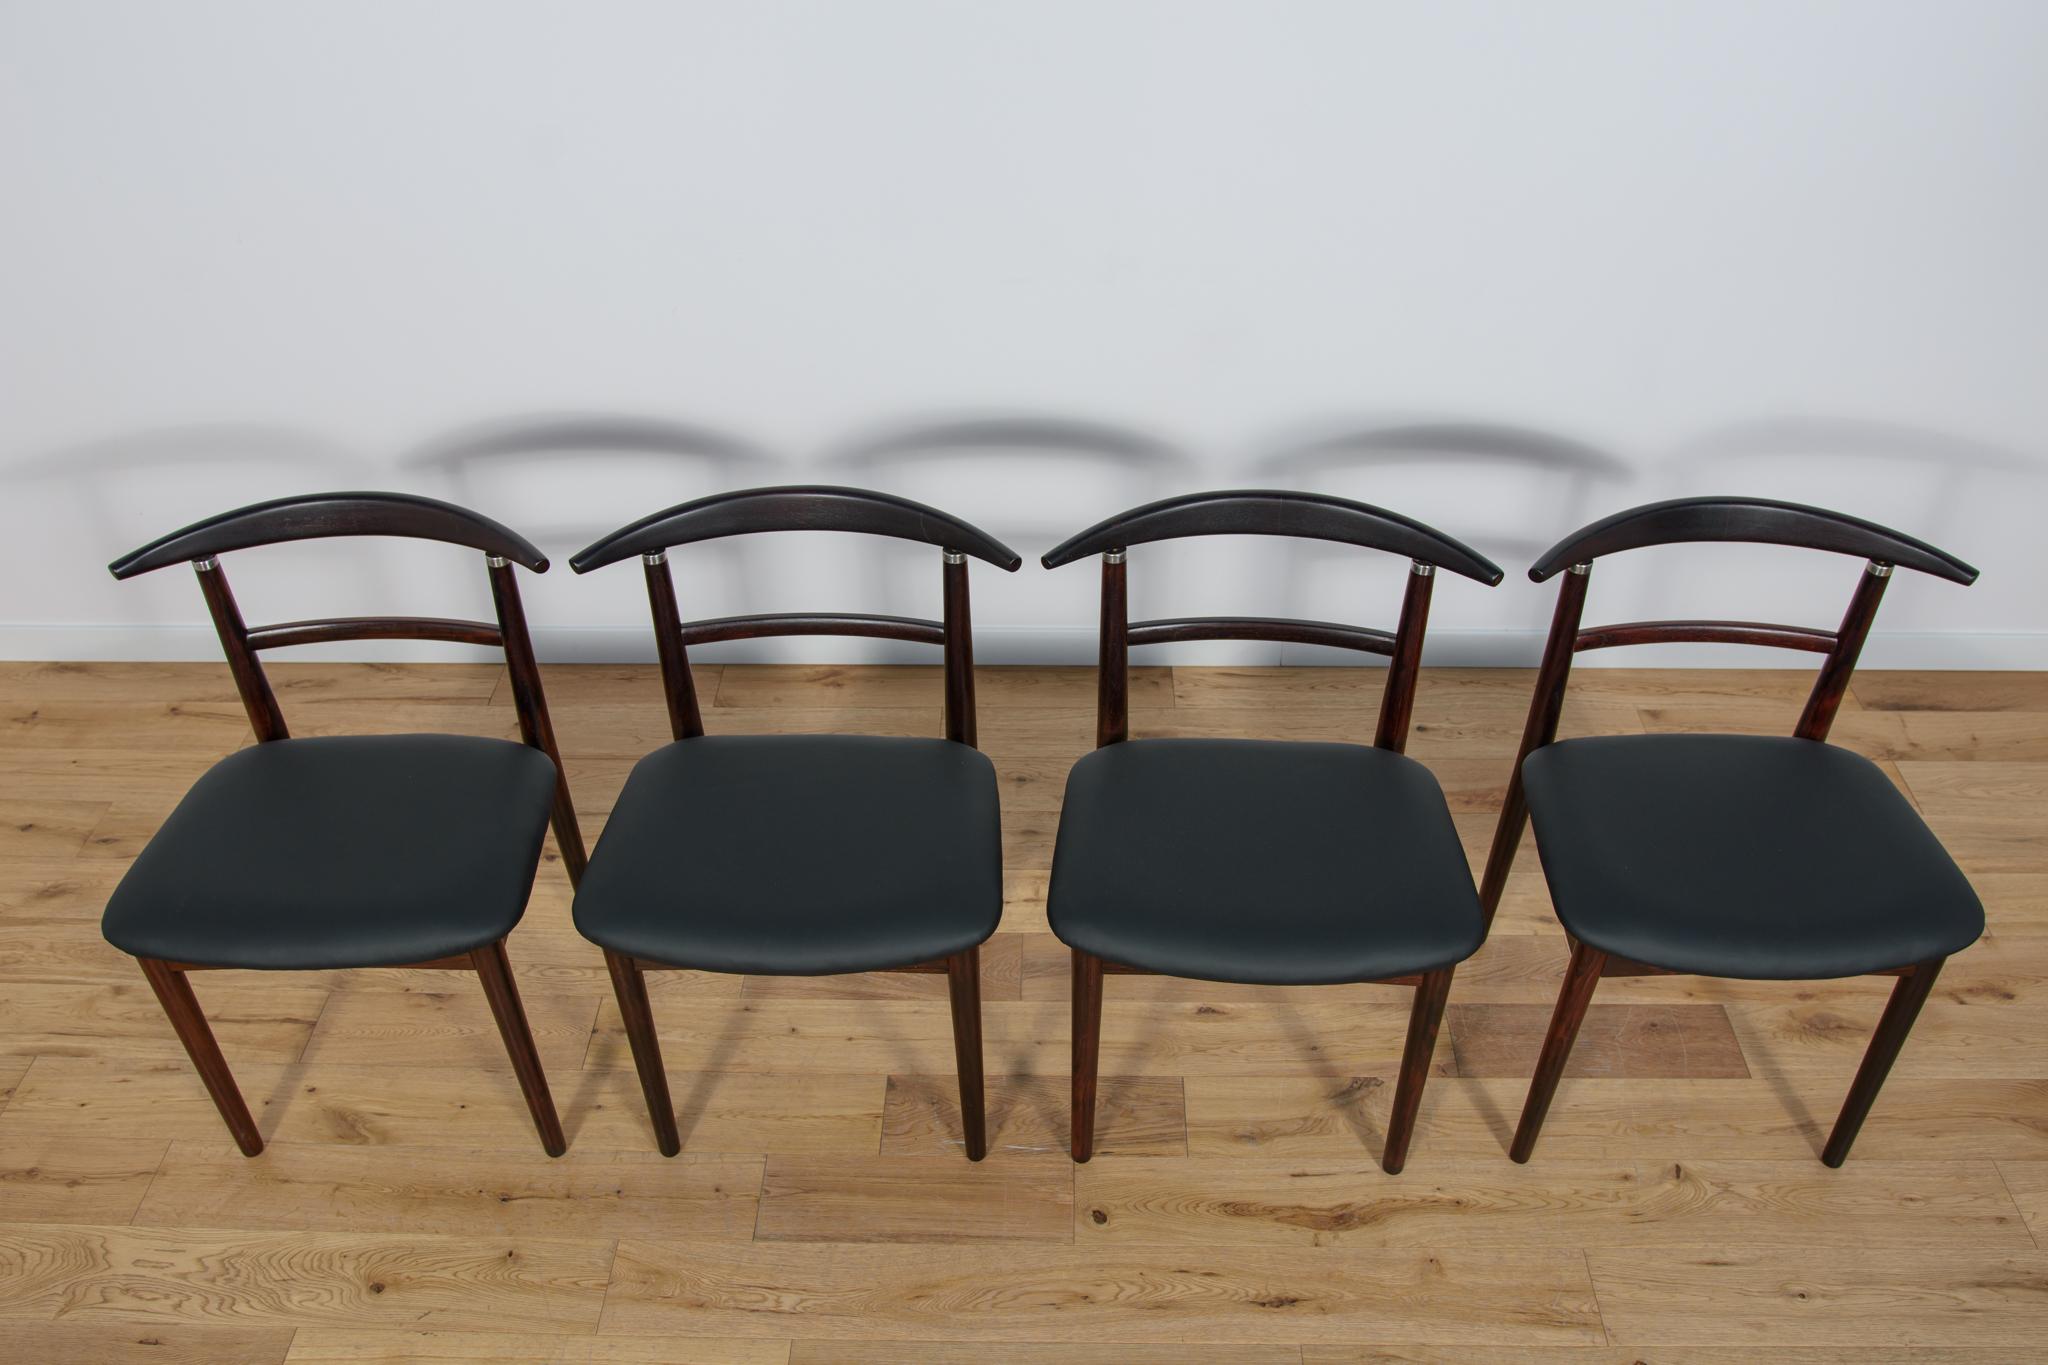 A set of four unique chairs designed by Helge Sibast and Borge Rammerskov for the Danish Sibast factory in the 1960s. The chairs have uniquely carved ergonomic backrests. The chairs have undergone comprehensive carpentry and upholstery renovation.